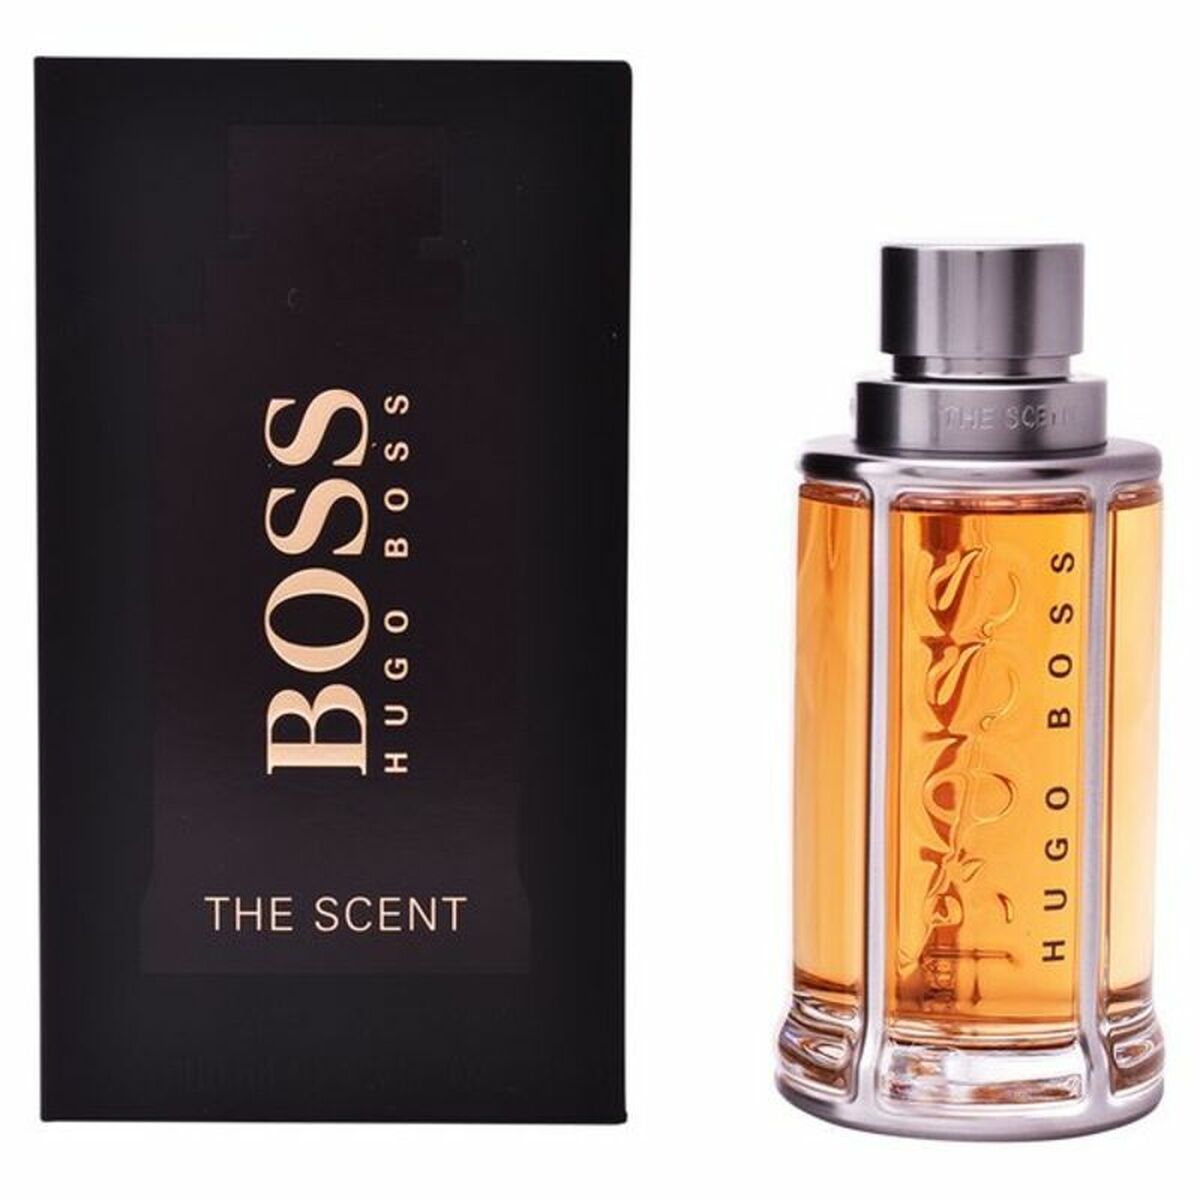 After Shave-Lotion The Scent Hugo Boss The Scent (100 ml) 100 ml - AWK Flagship